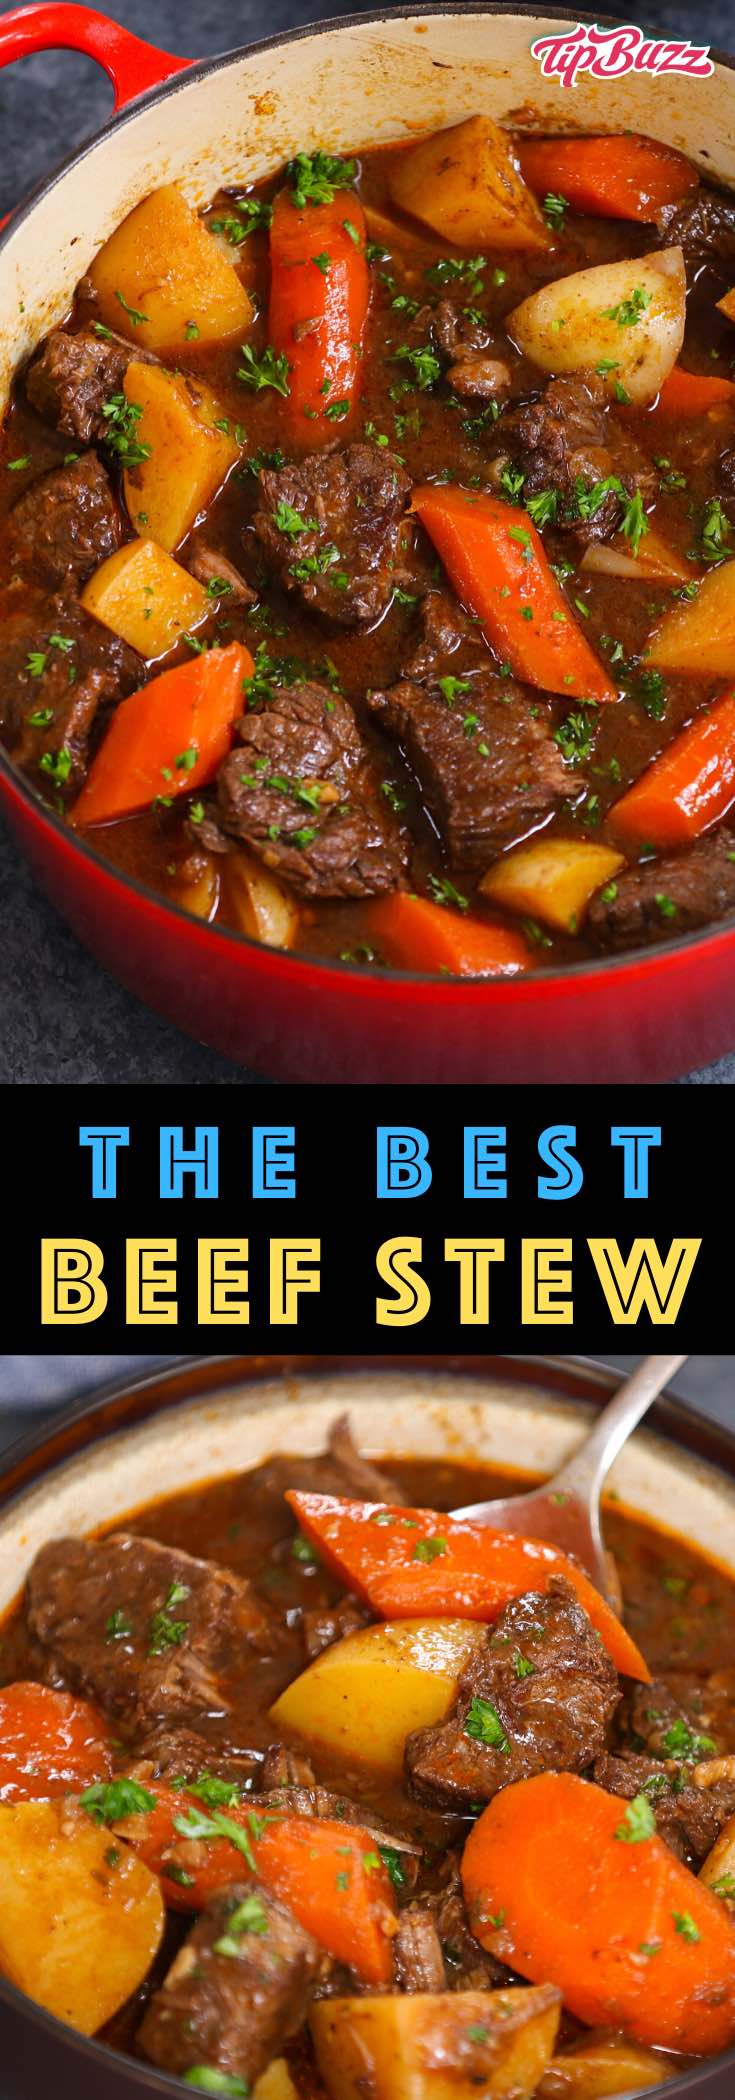 This simple Beef Stew has tender, melt-in-your-mouth beef with carrots, onions, and potatoes simmered in a rich sauce. It's a hearty and satisfying dinner that you can easily make ahead of time.